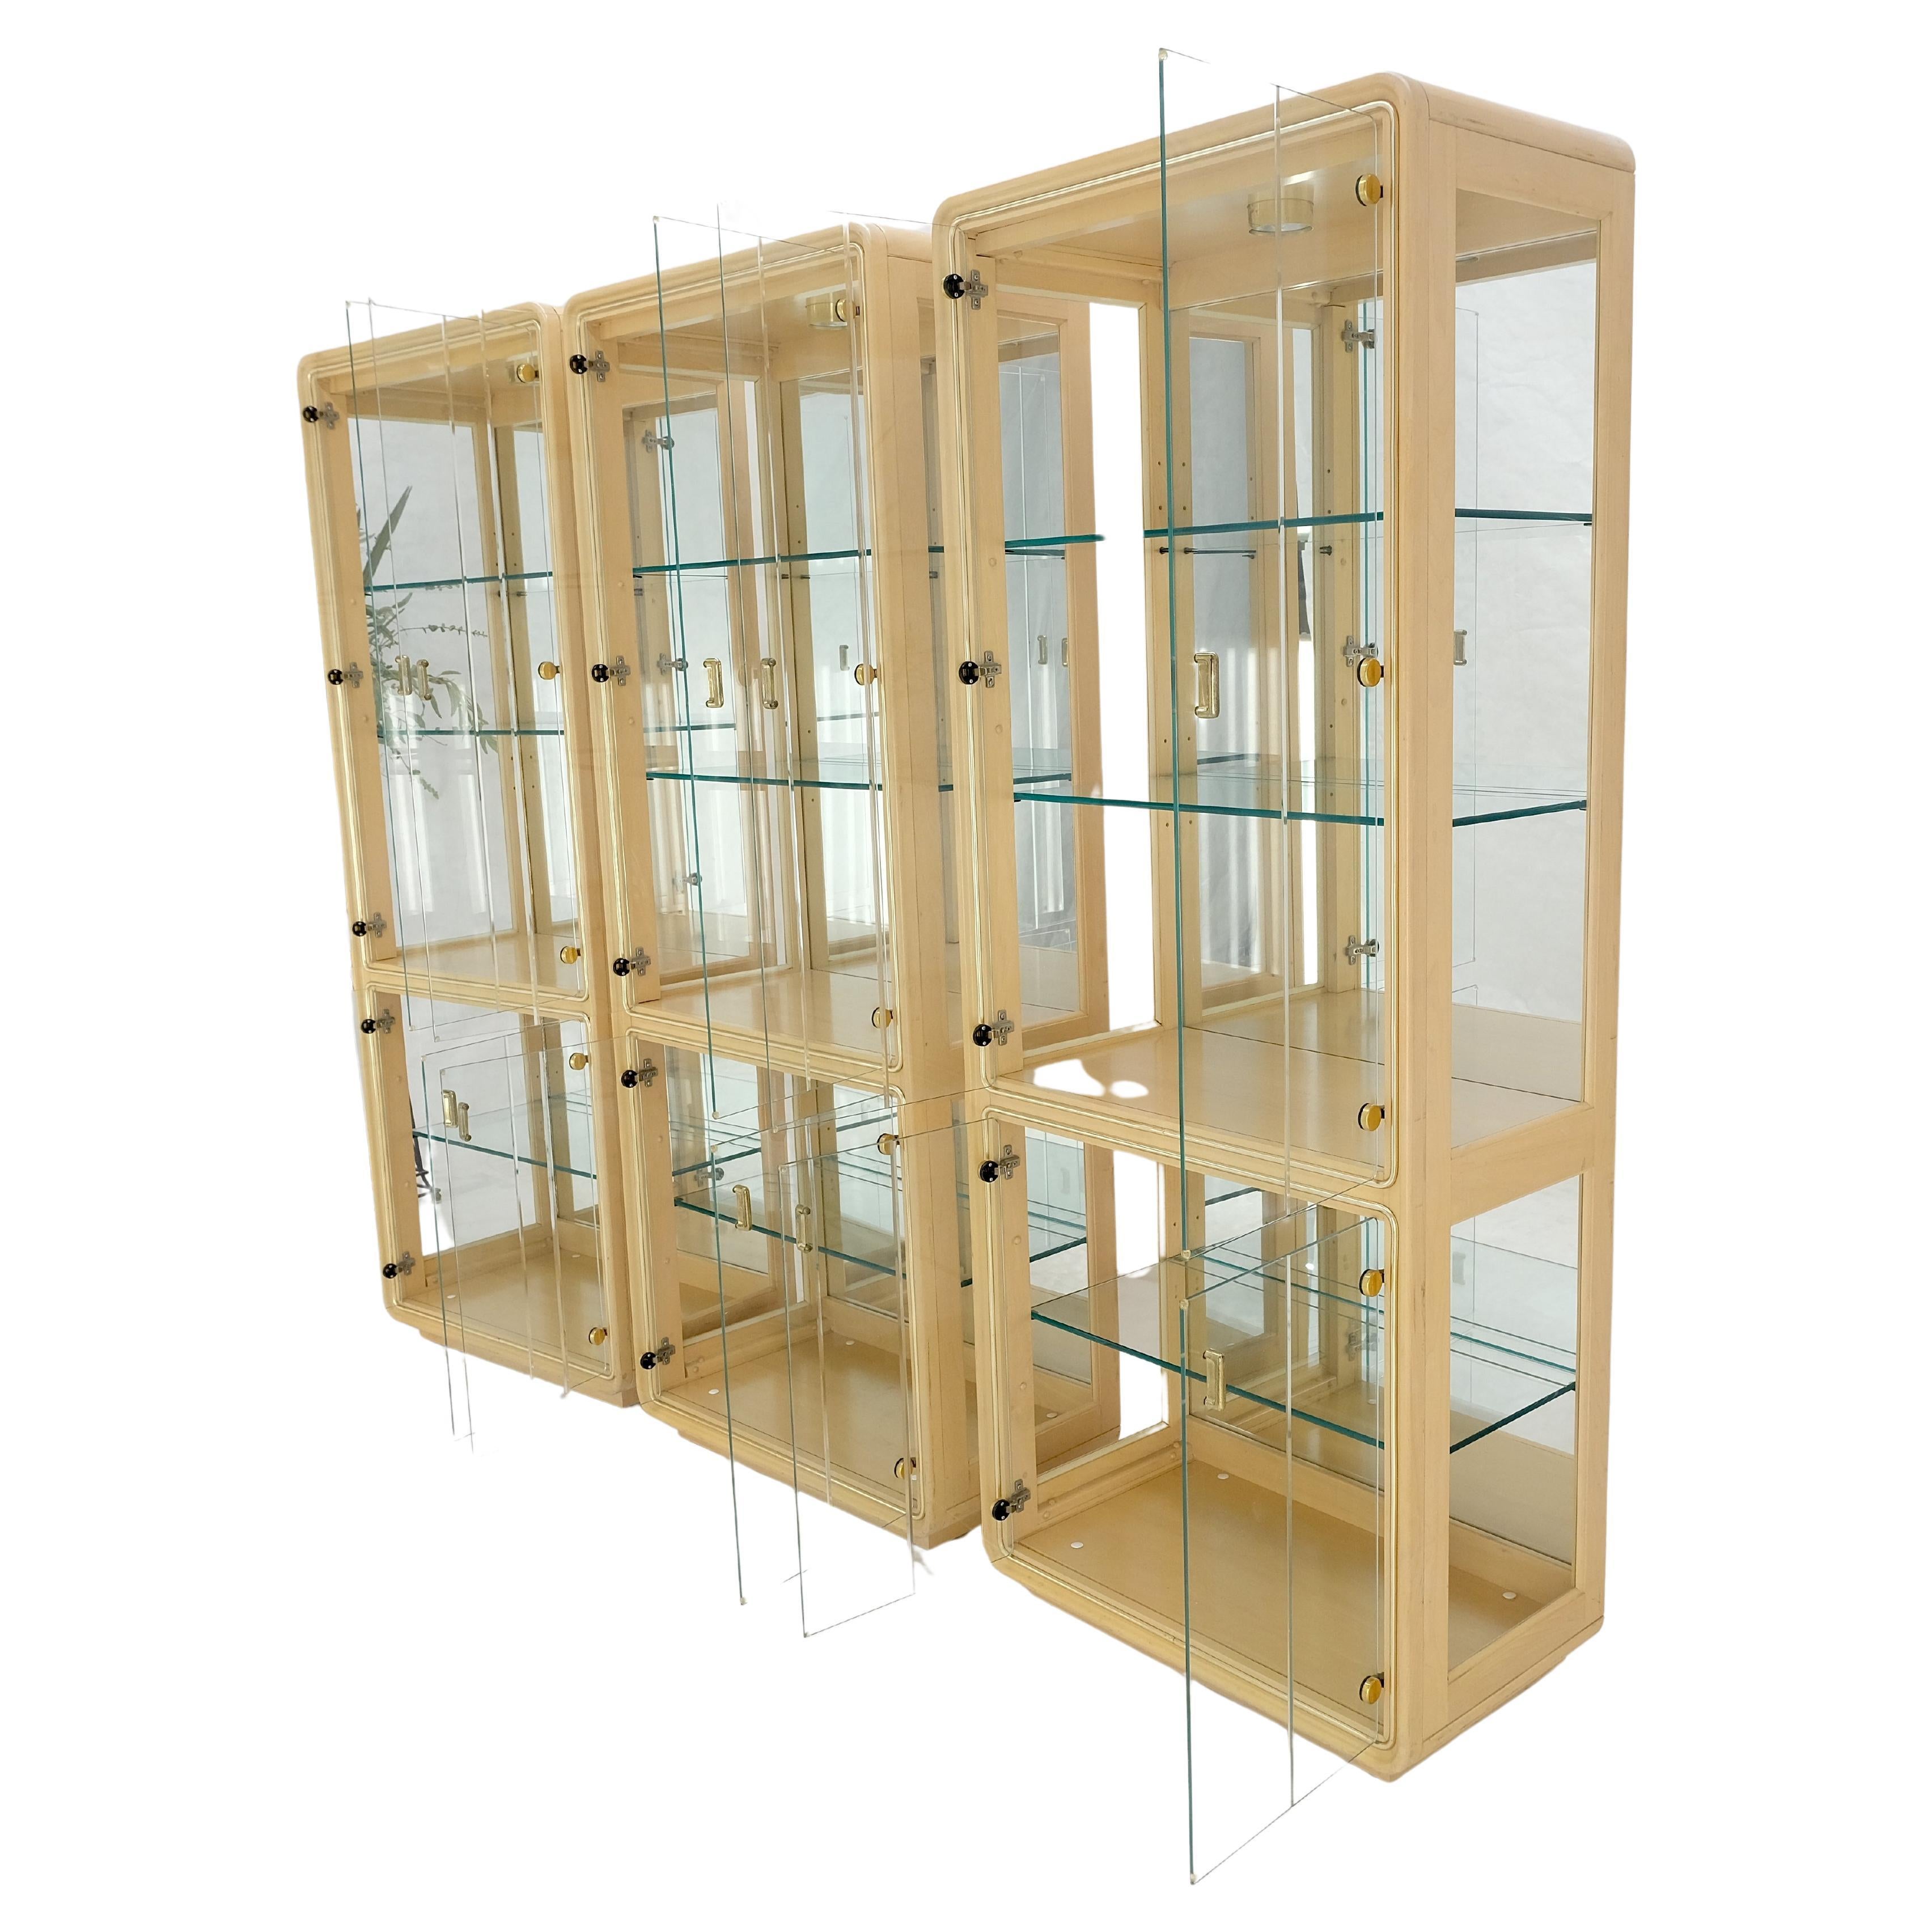 3 Blond Wood Glass Door Curio Cases Display Vitrine Cabinet Glass Shelves MINT! For Sale